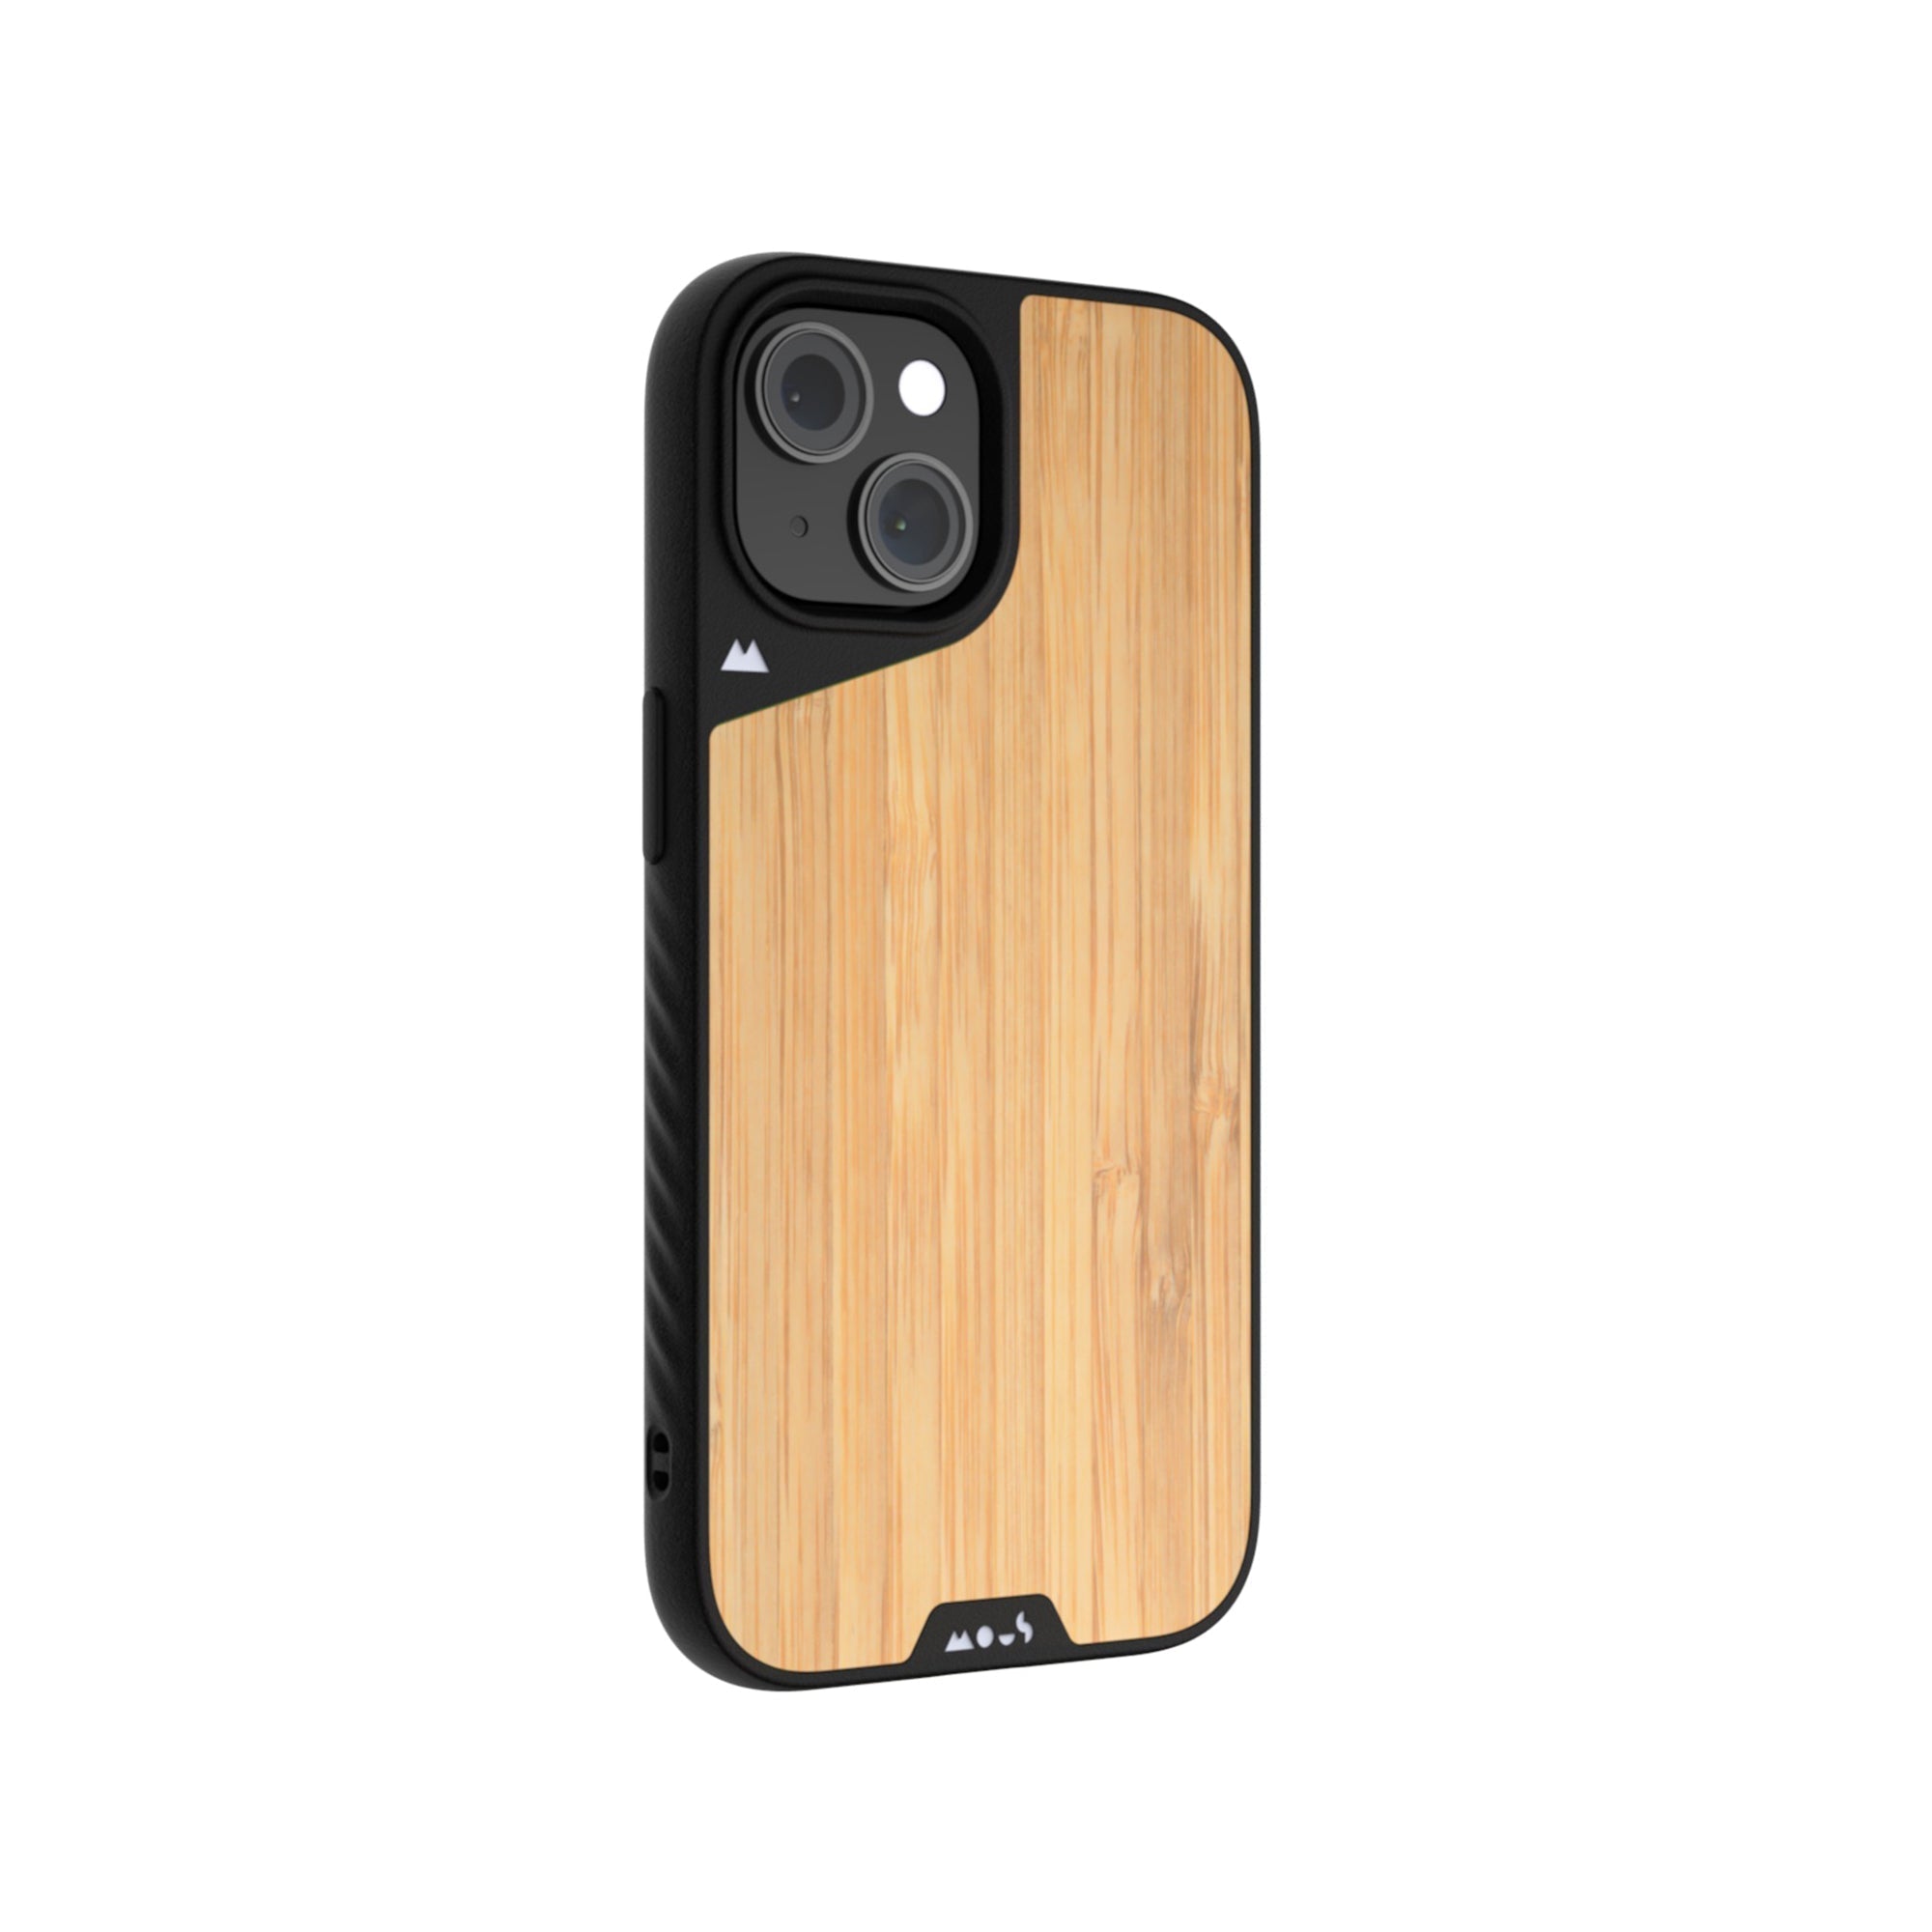 Vazico I-Phone Series 11, 12, 13, 14, 15 Case Compatible Bamboo Phone Case - Limitless 5.0